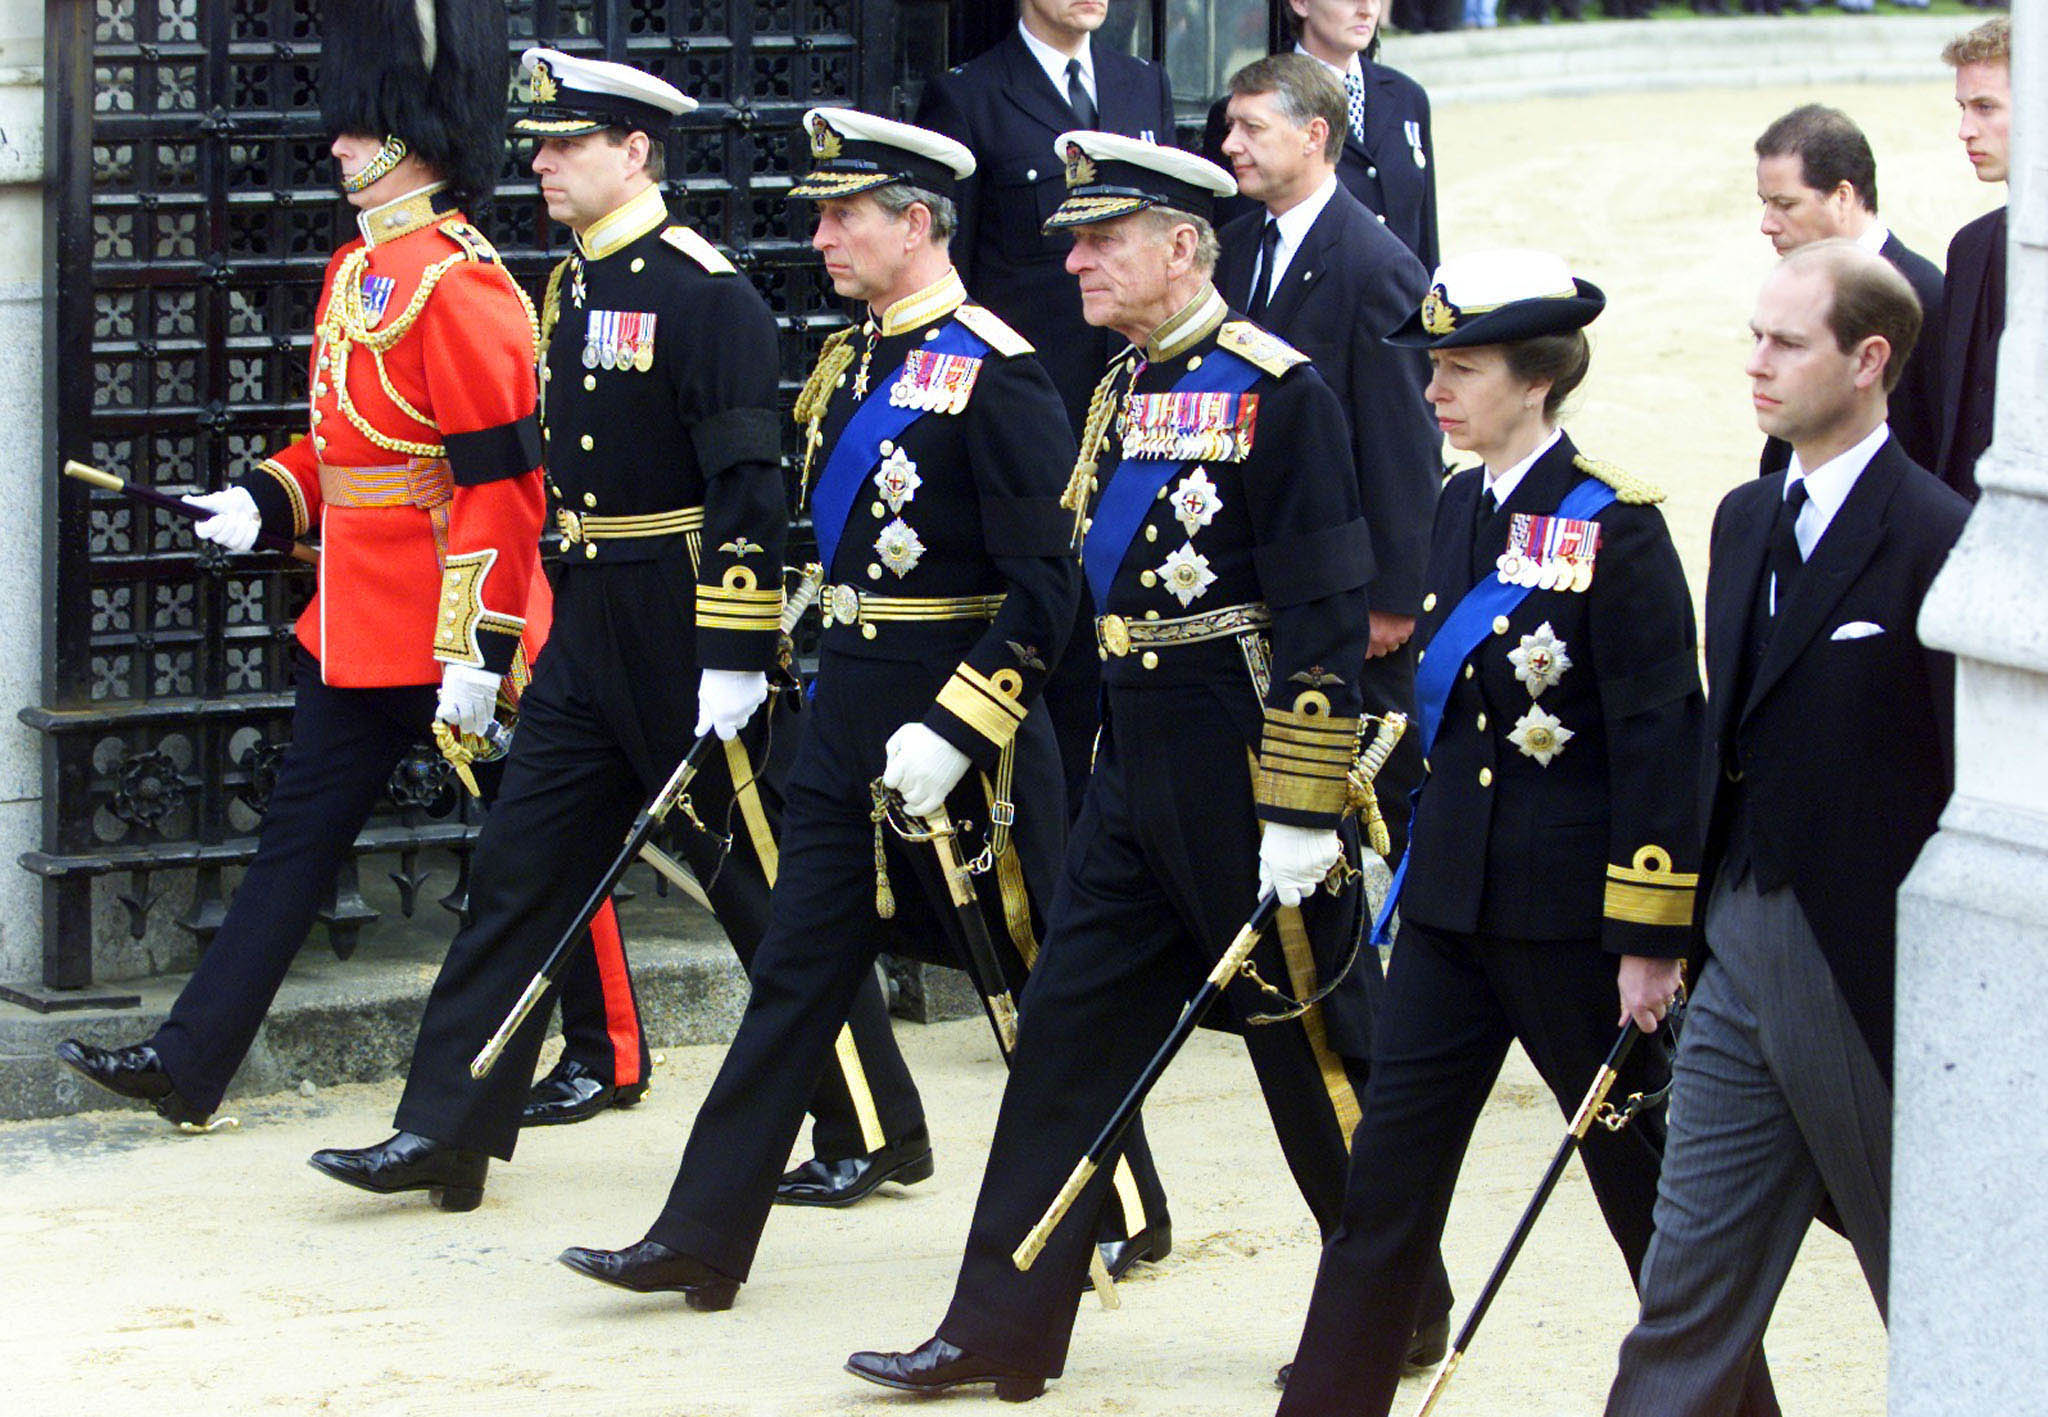 <p>Four of Queen Elizabeth the Queen Mother's grandchildren -- Prince Andrew, Prince Charles (now King Charles III), Princess Anne and Prince Edward -- joined her son-in-law, Prince Philip, as they walked in her funeral cortege toward Westminster Abbey in central London on April 9, 2002. </p><p>She died that March 30 at 101 at her home, Royal Lodge in Great Windsor Park, where grandson Andrew, the Duke of York, now lives.</p>